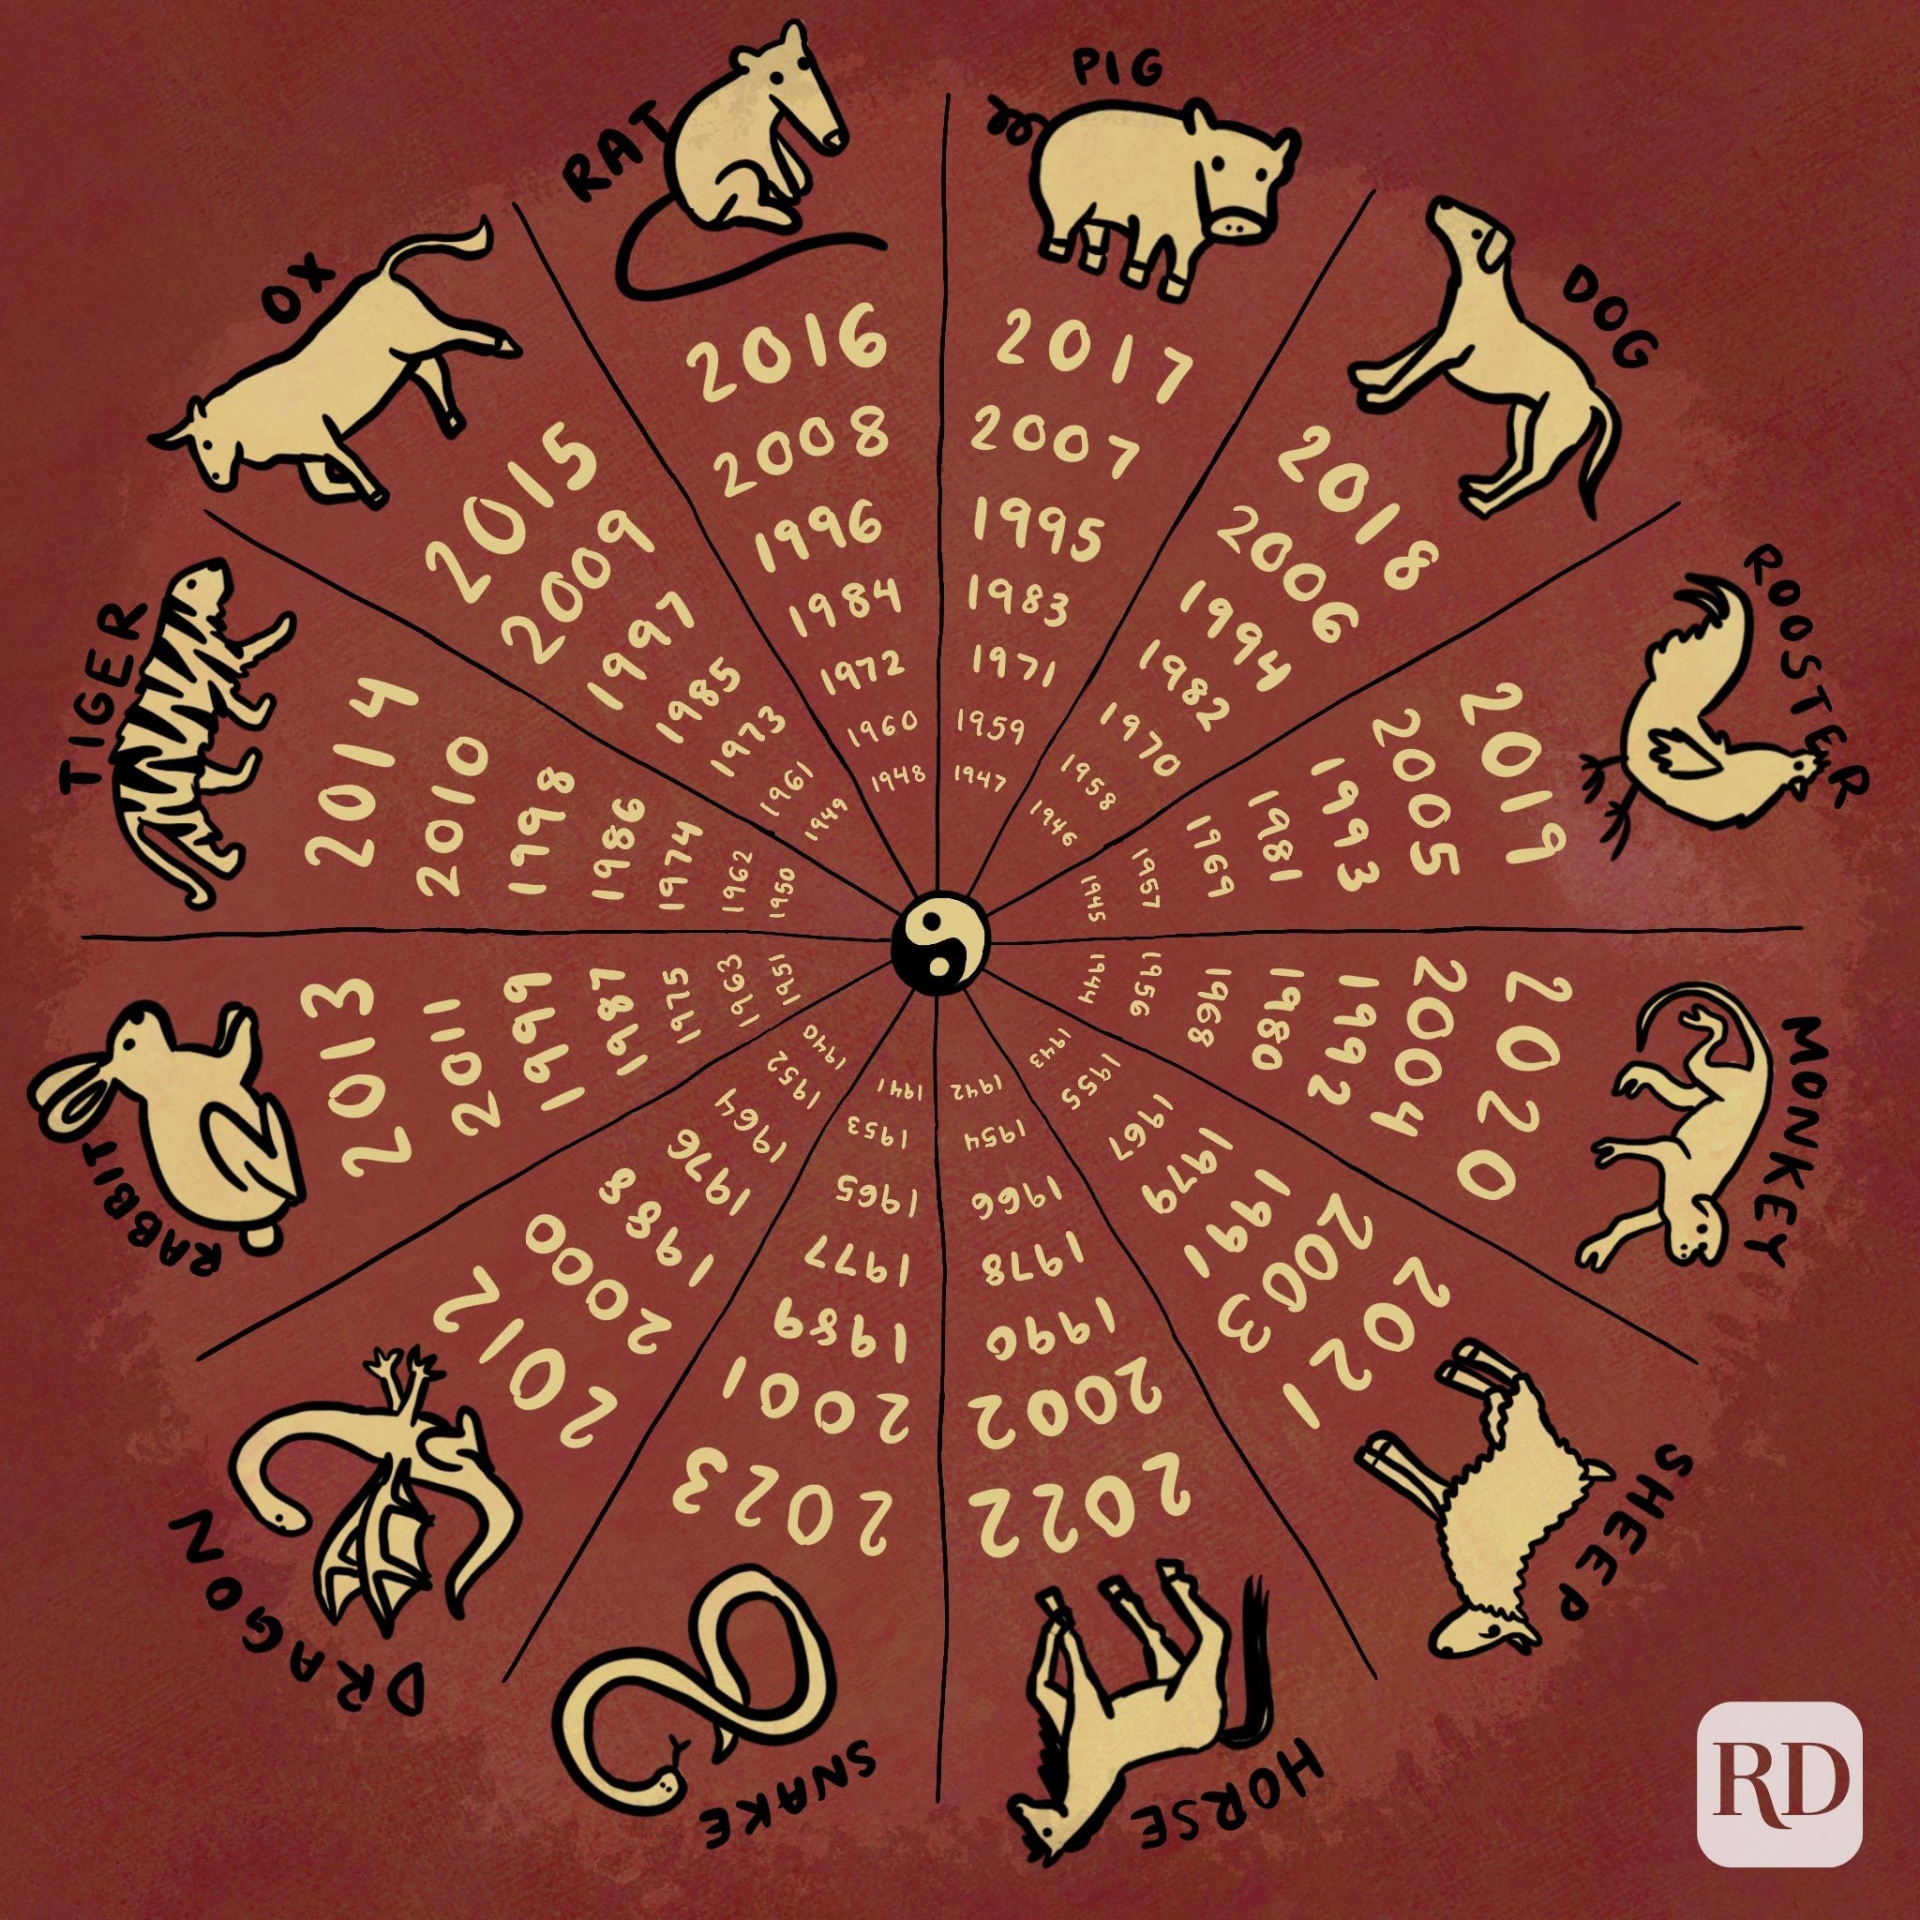 Chinese Zodiac Signs. Photo: Reader's Digest